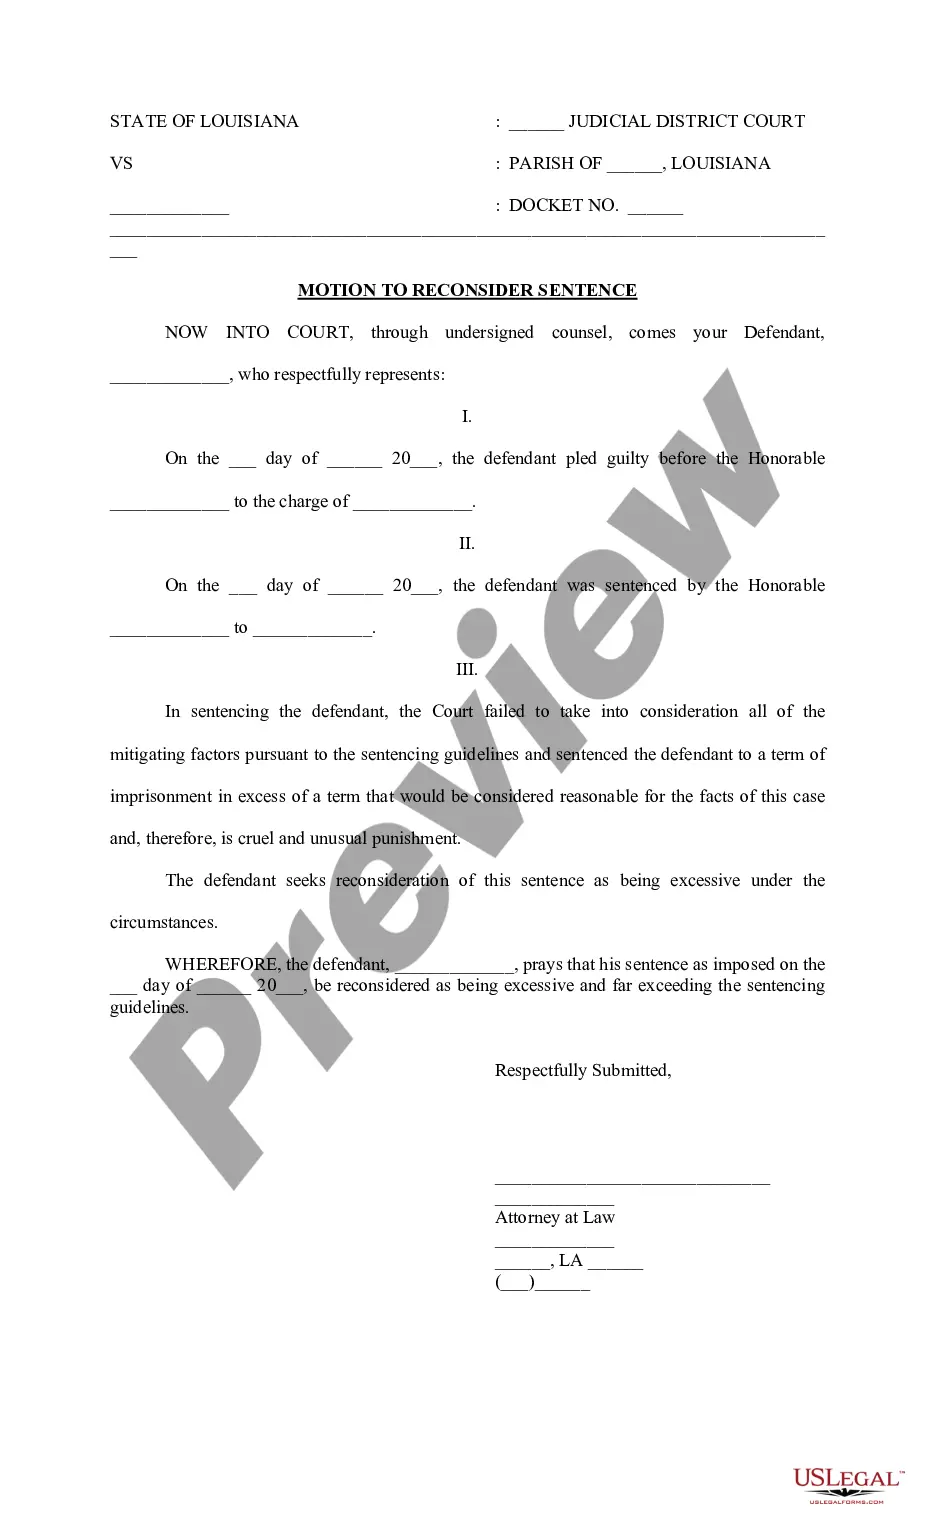 Court Reporters Of Louisiana Without License US Legal Forms